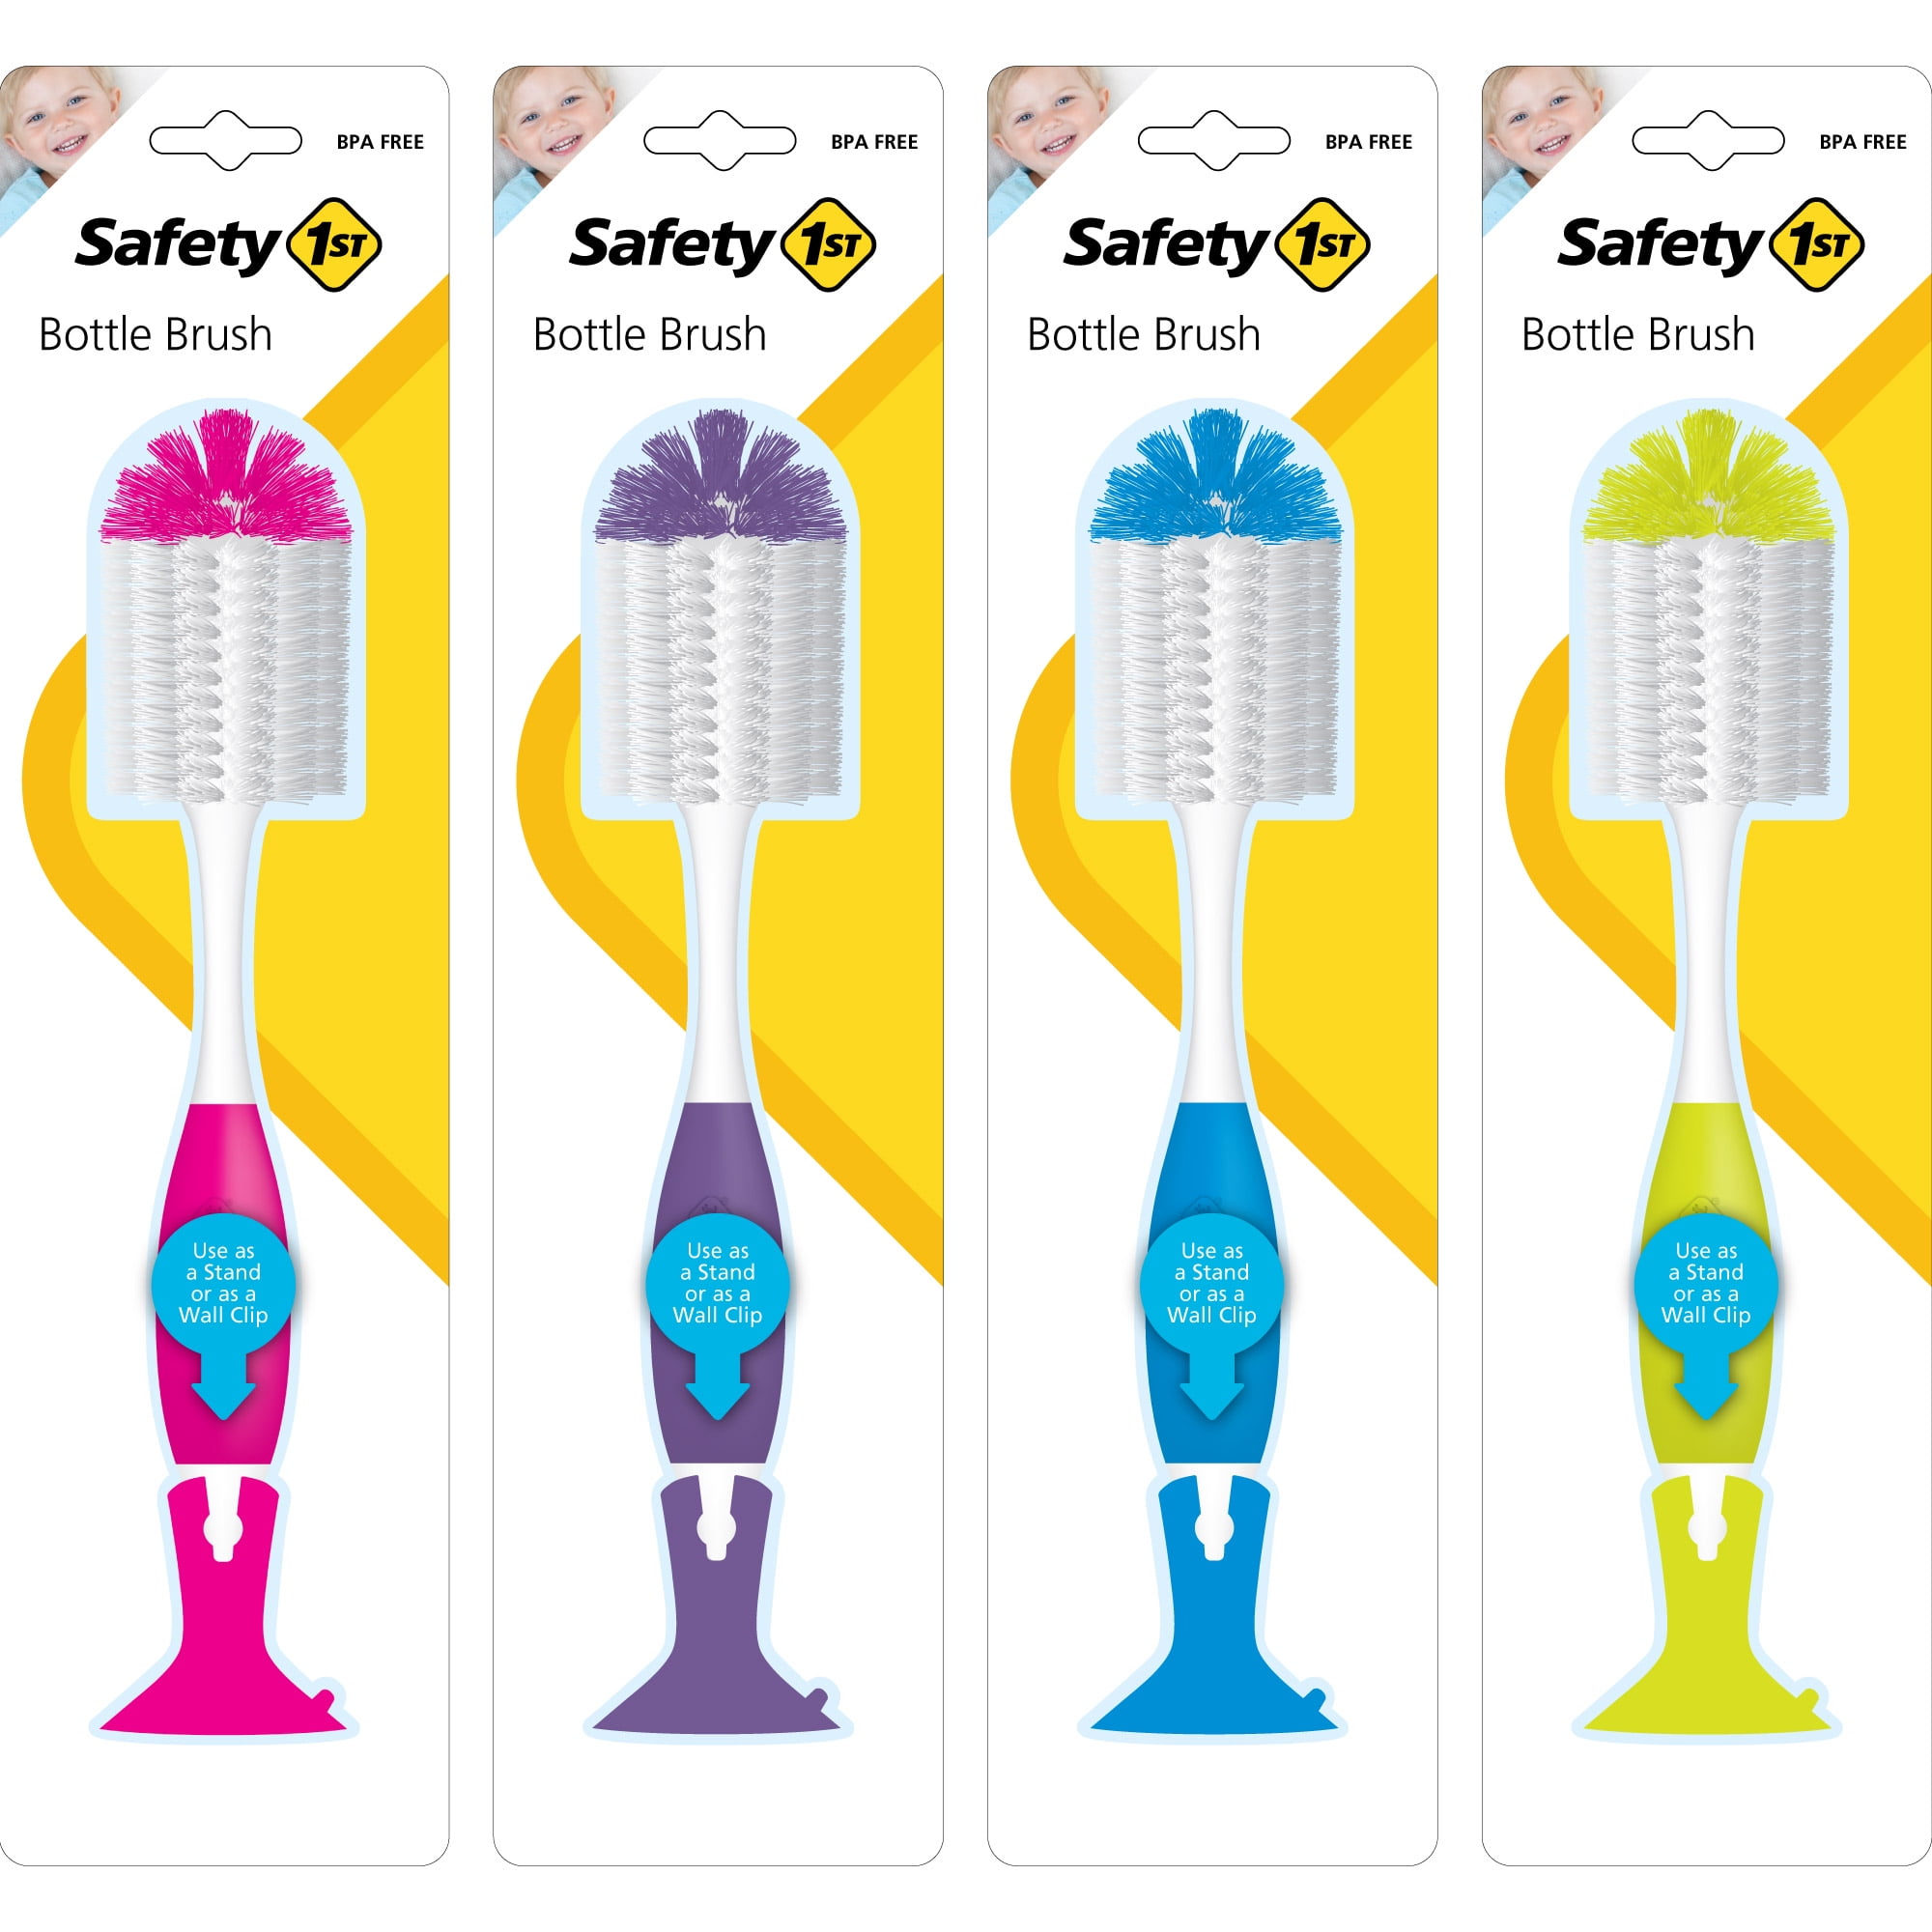 Safety first bottle brush easy to use, available in multiple colors to spruce up your kitchen. Suction cup on the bottom to secure to your countertop or sink when not in use.